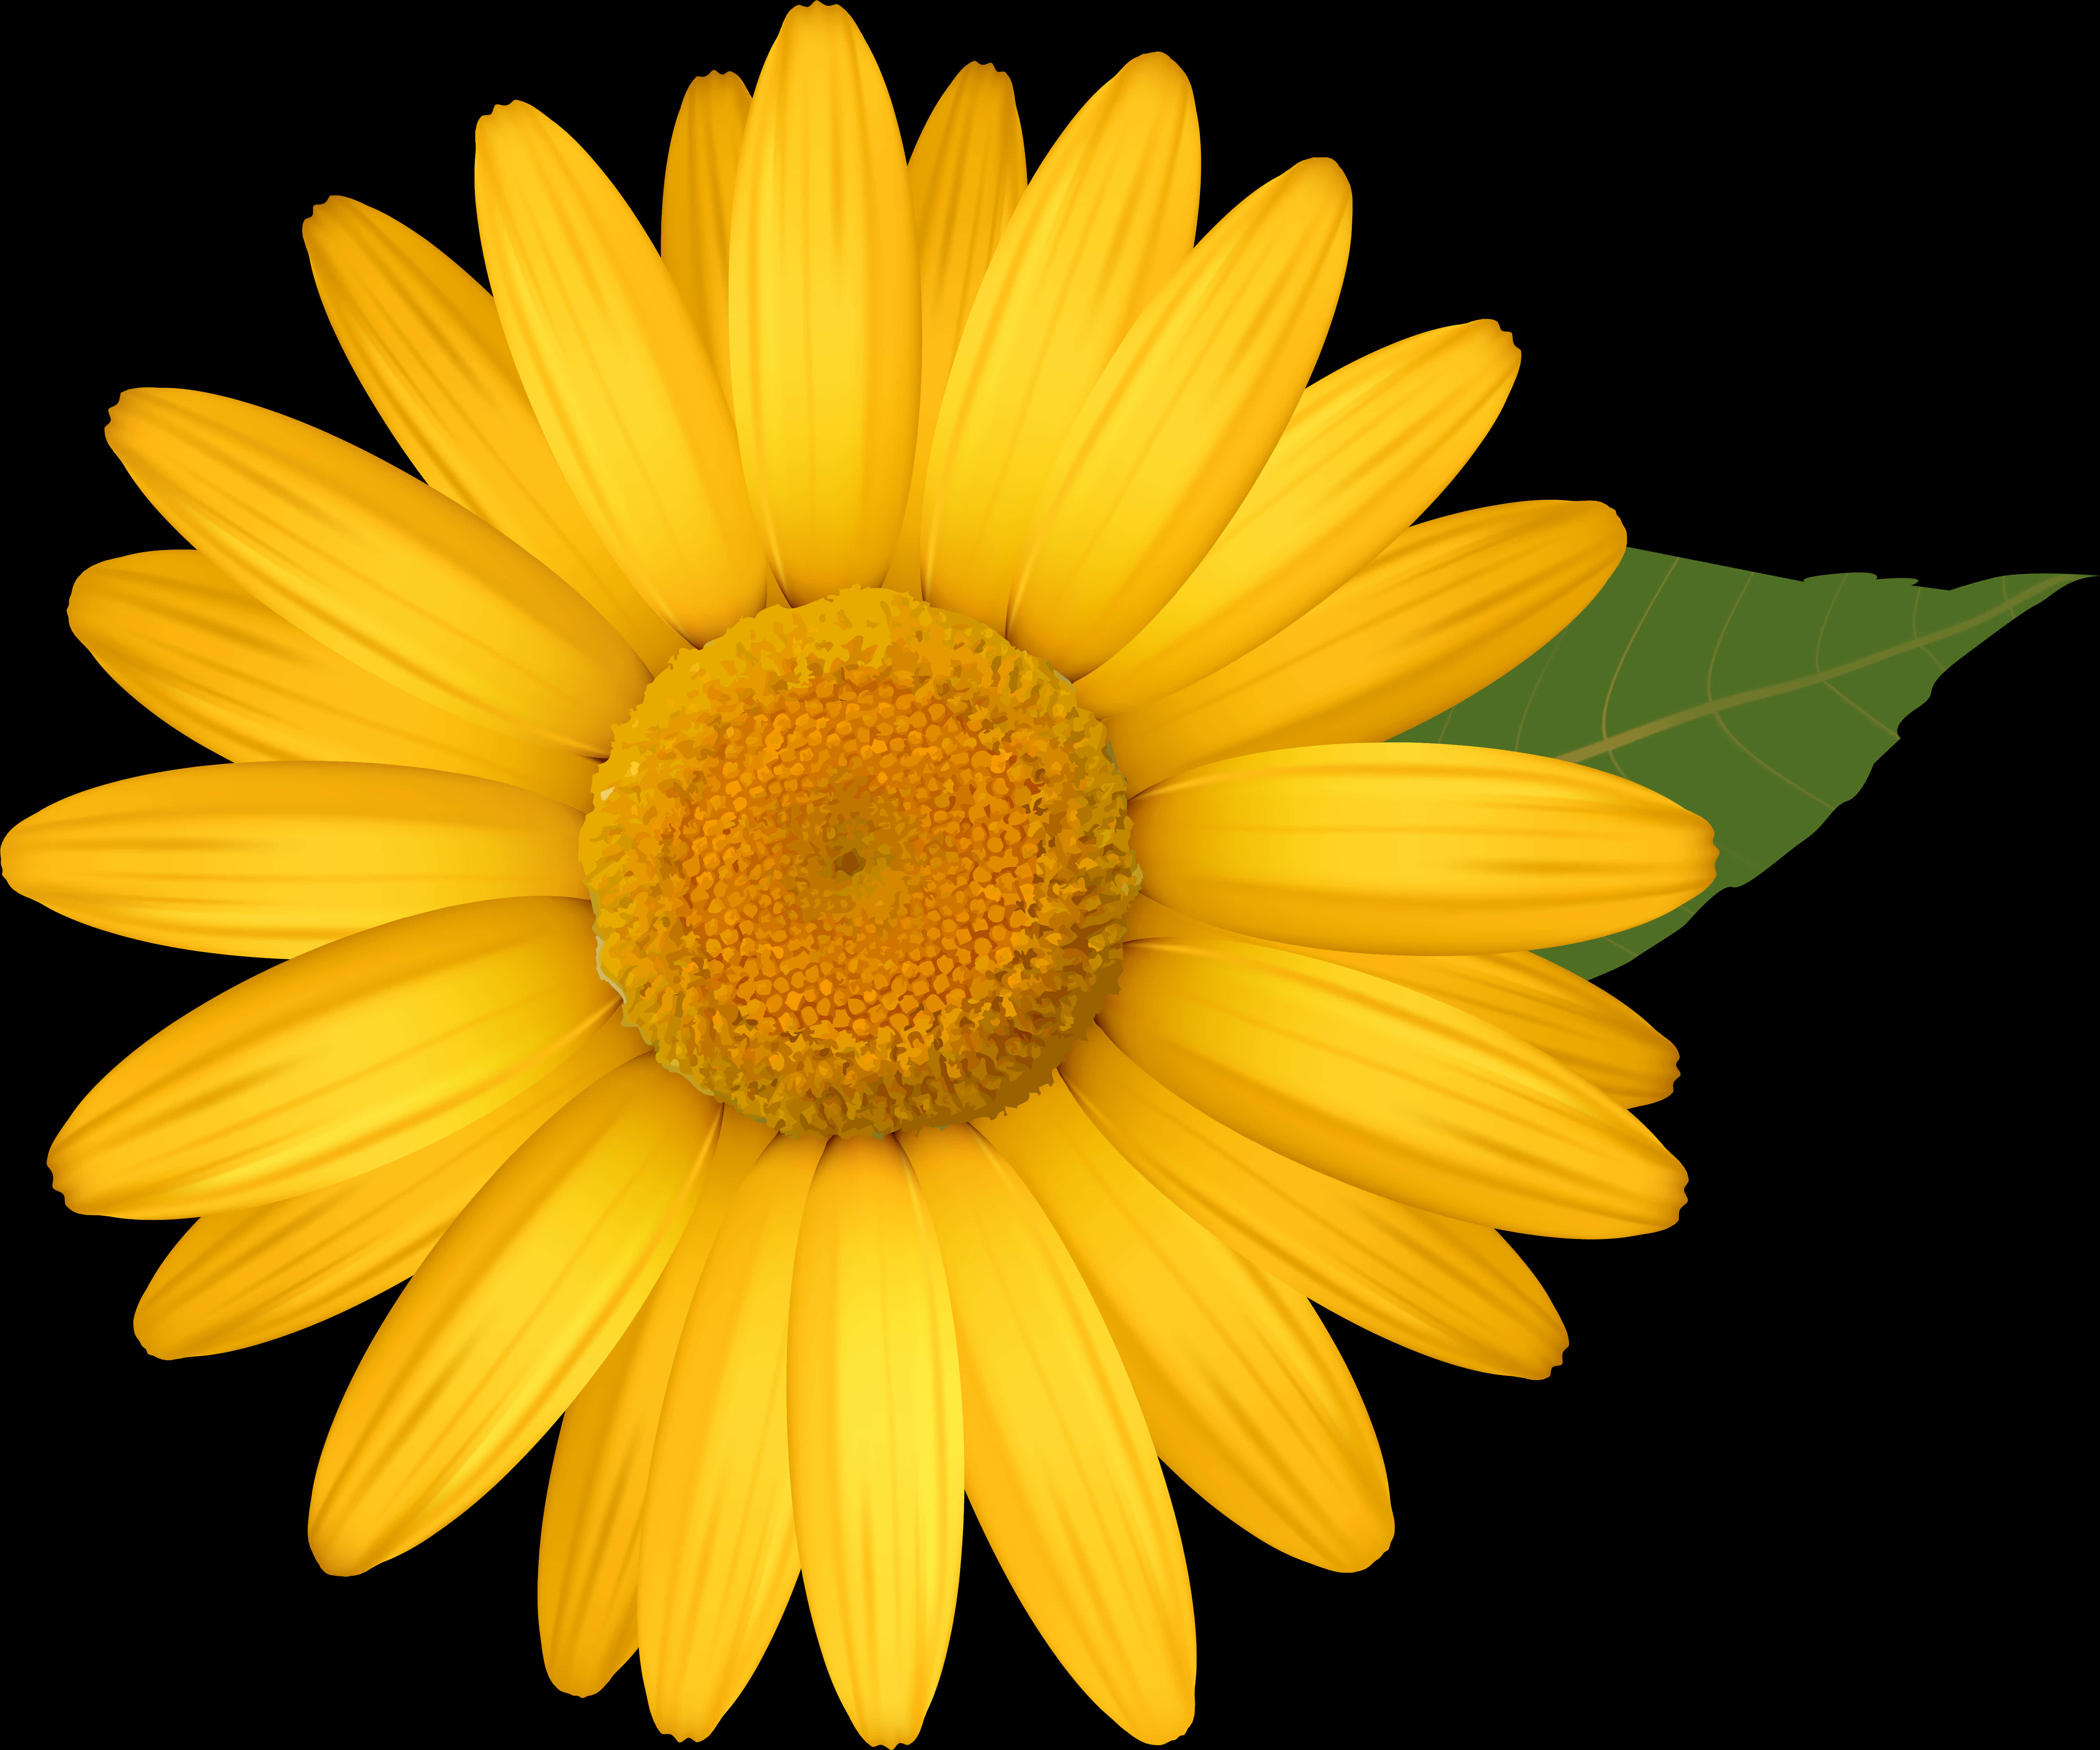 A Yellow Flower With A Green Leaf